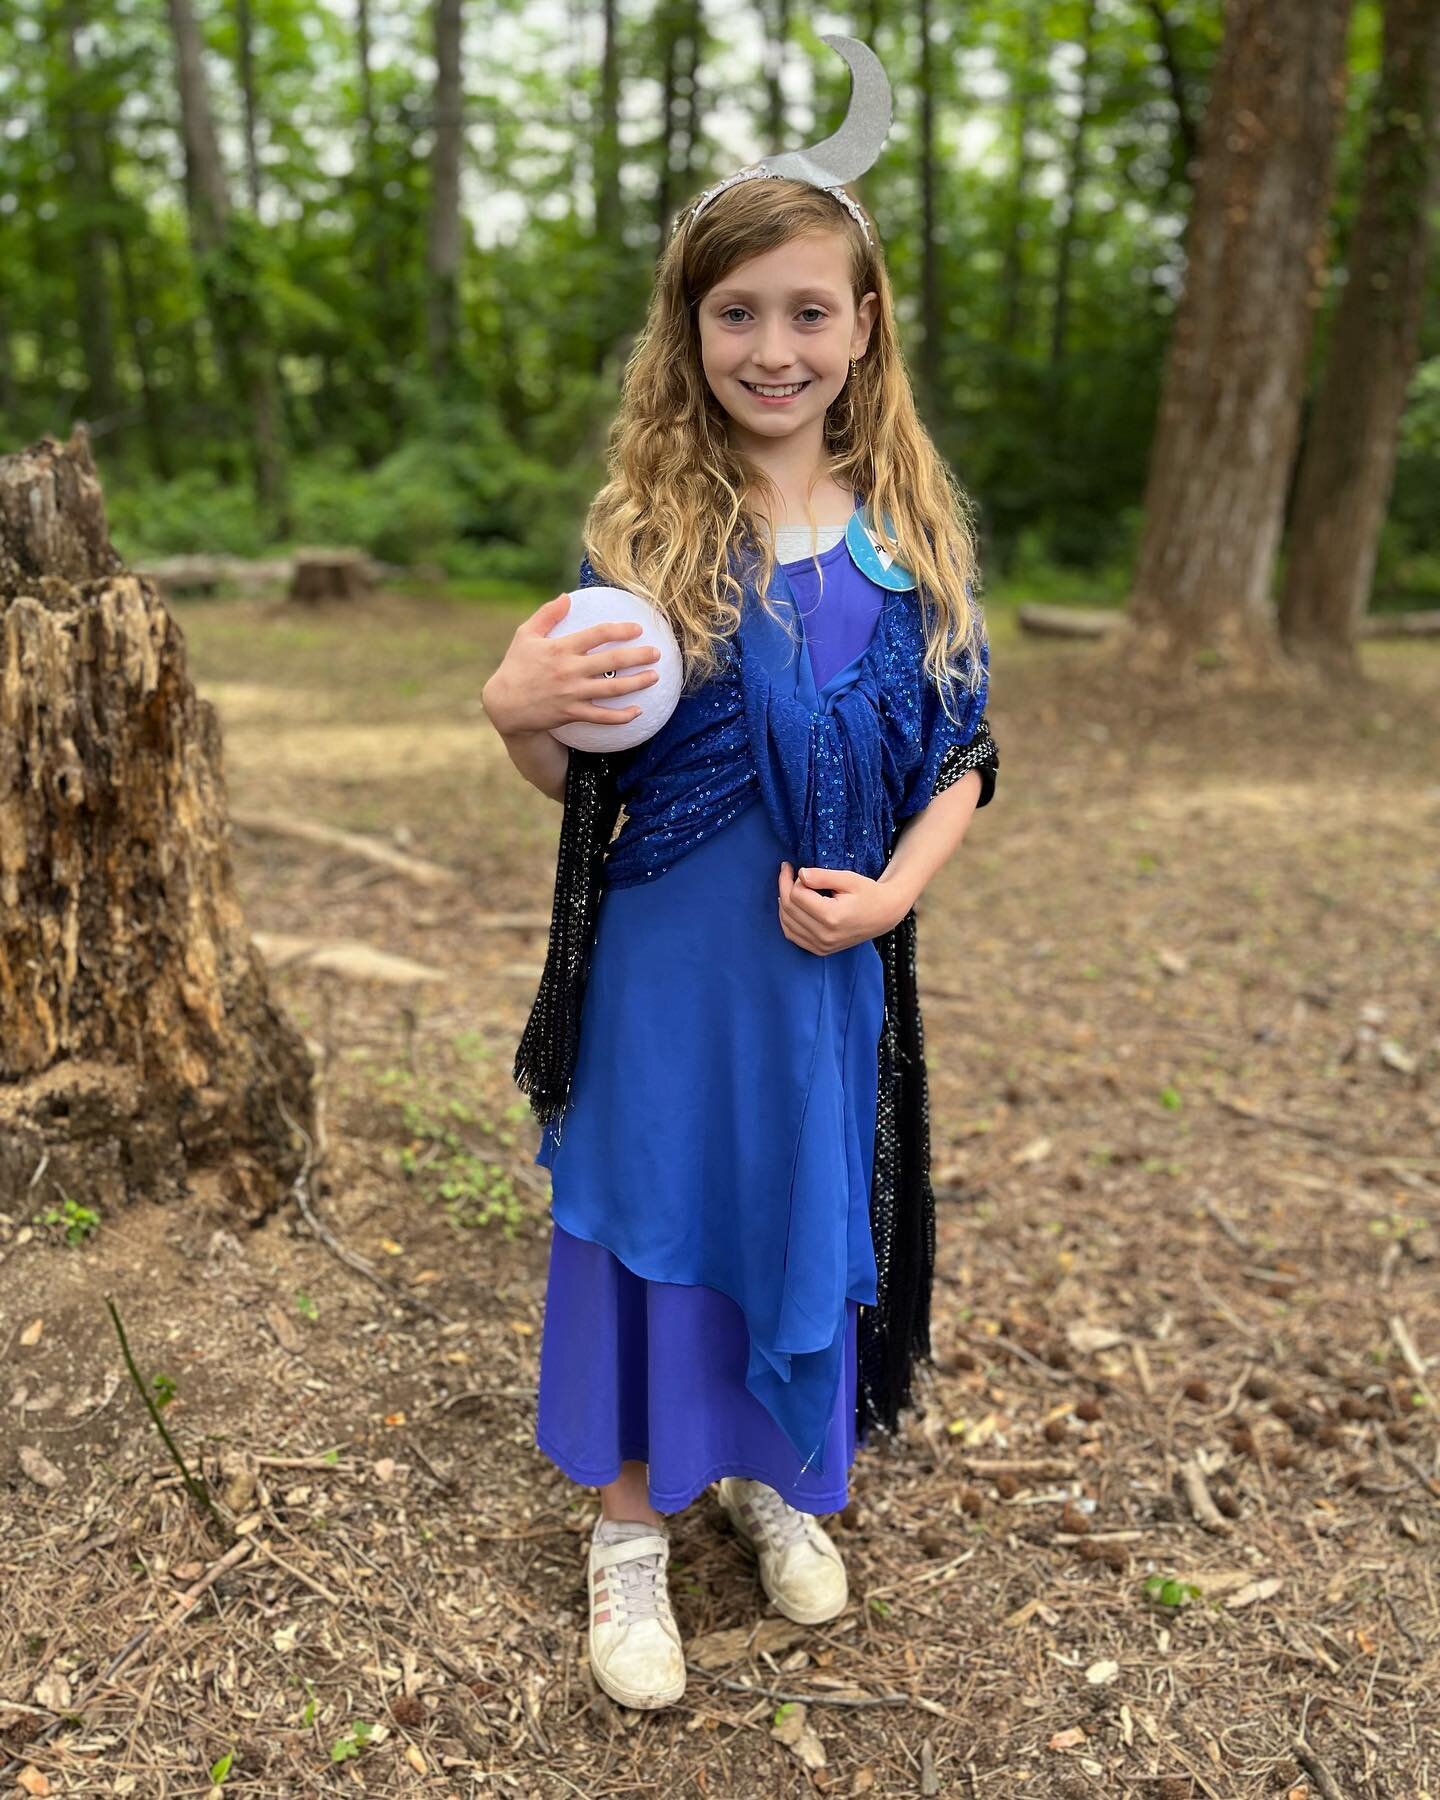 This year, our Elementary students transformed into Greek mythological figures for our annual Wax Museum! Enjoy! 🍎

#rva #rvaschools #montessori #montessorielementary